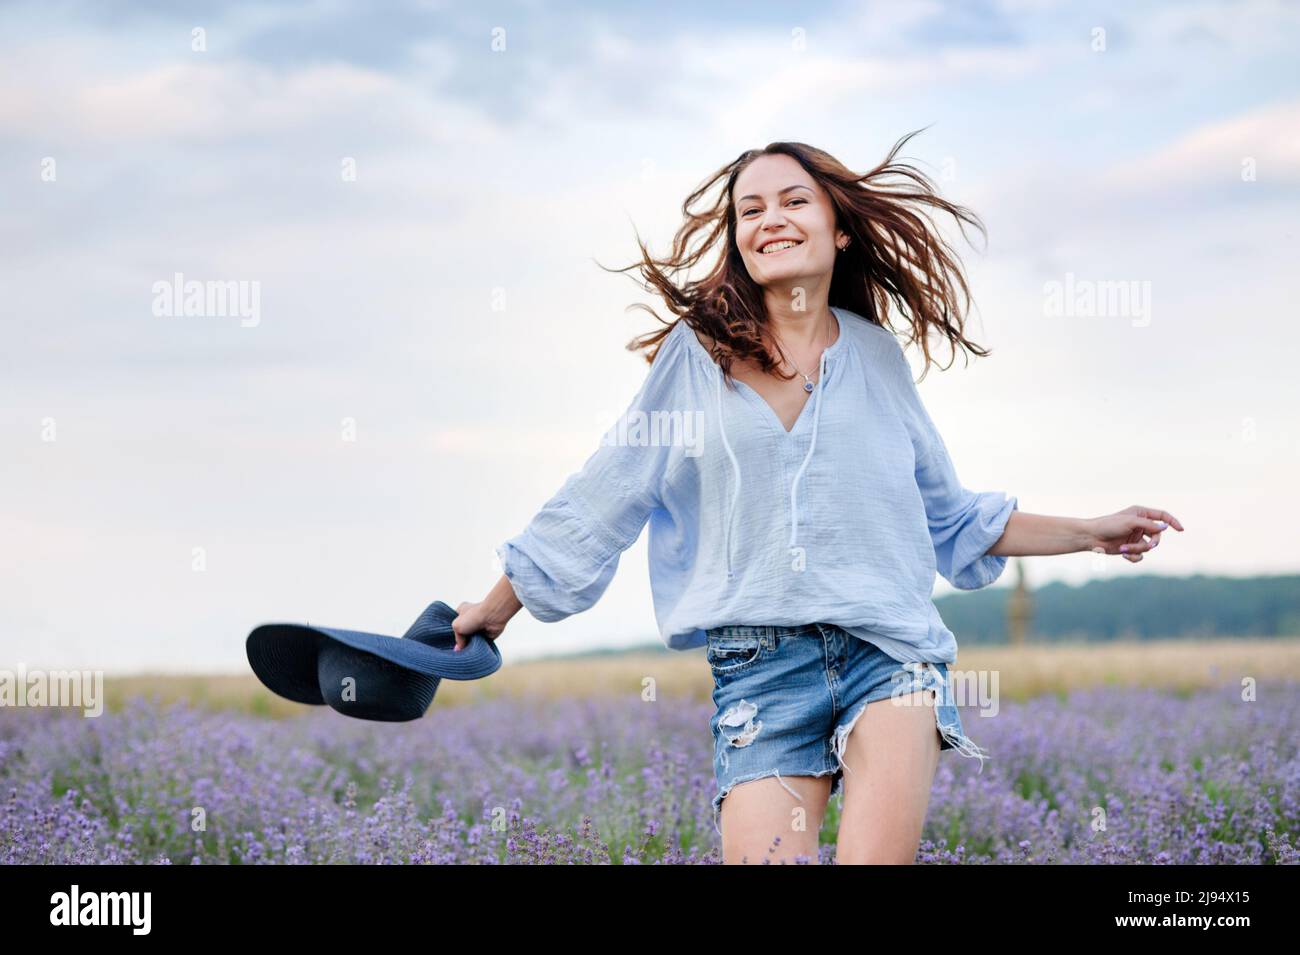 happy girl running in lavender field holding hat in hand, fluttering hair Stock Photo